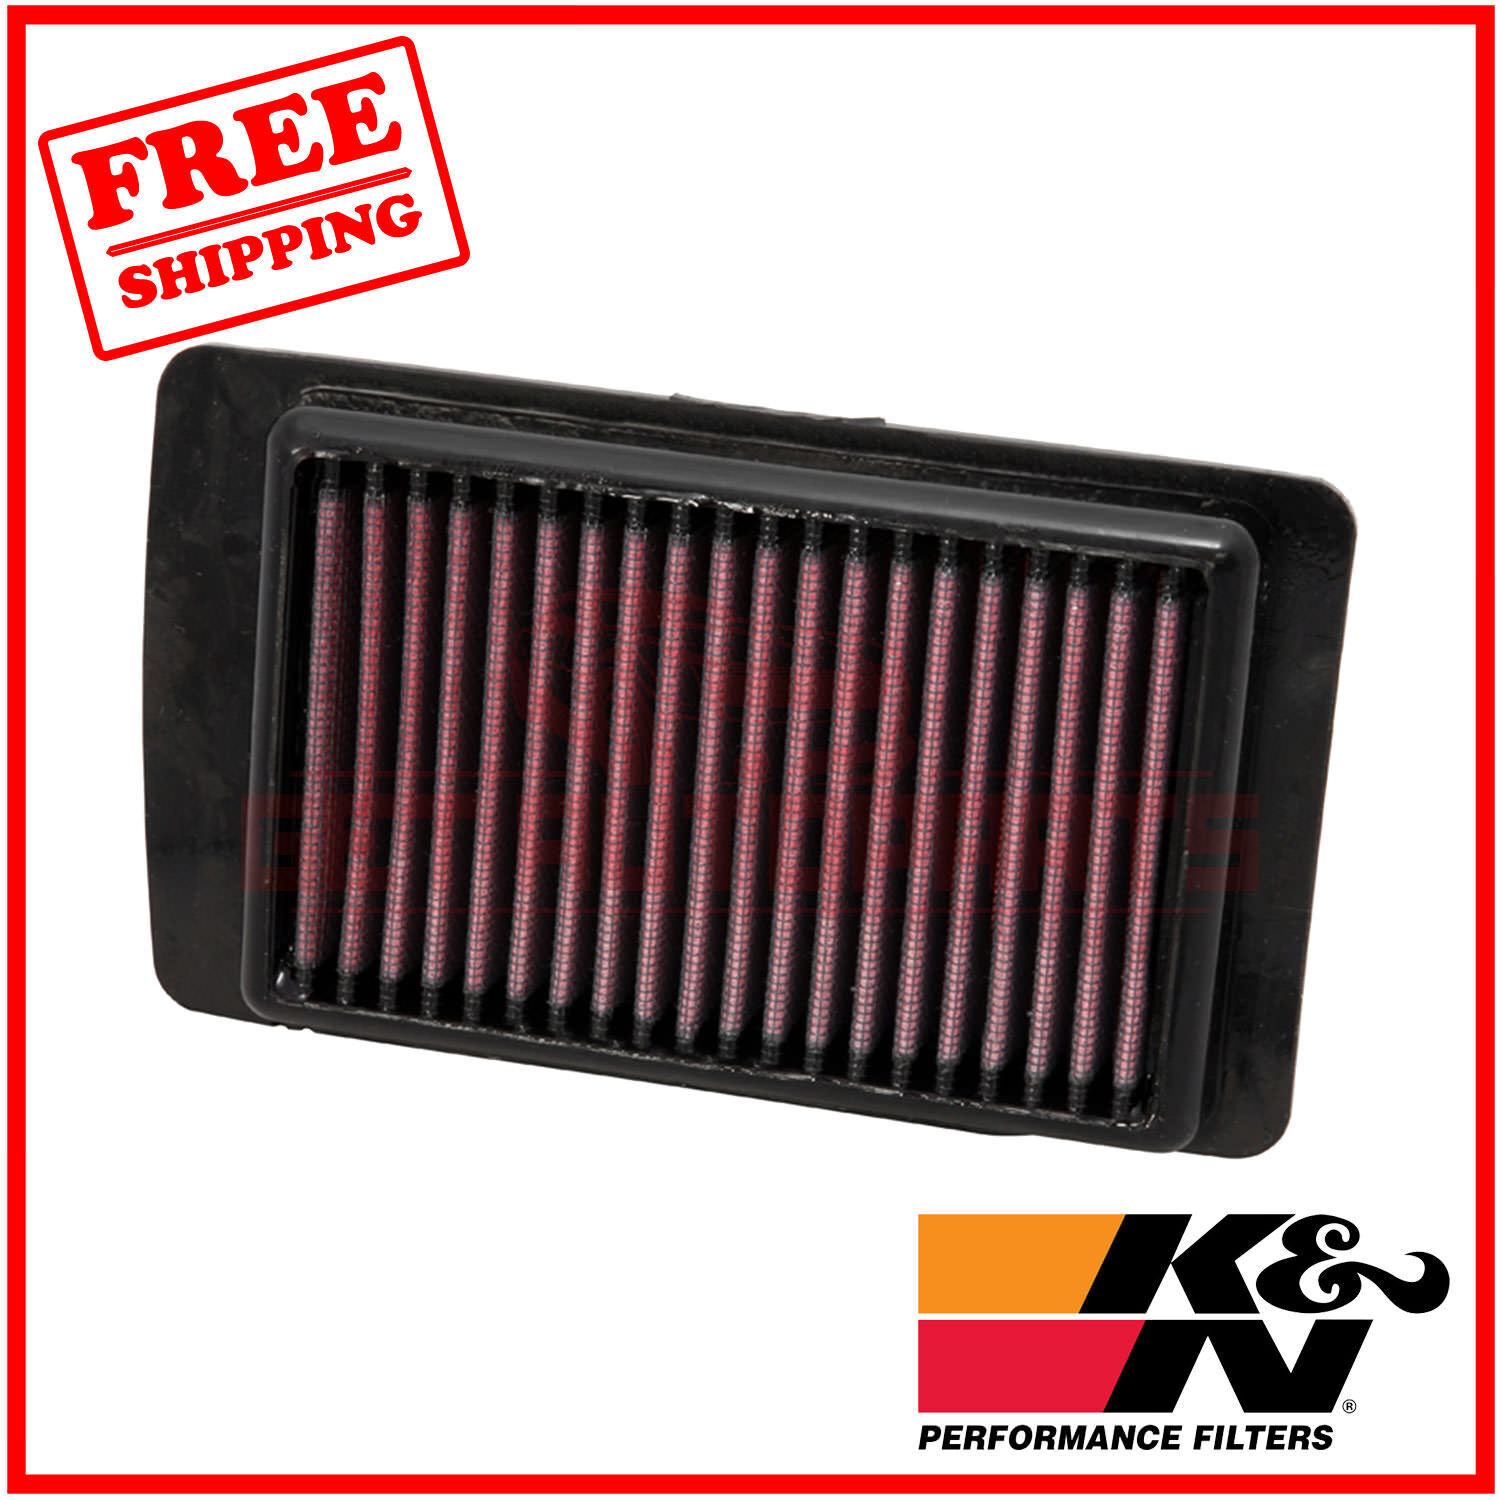 K&N Replacement Air Filter for Victory Vegas 8-Ball 2008-2017